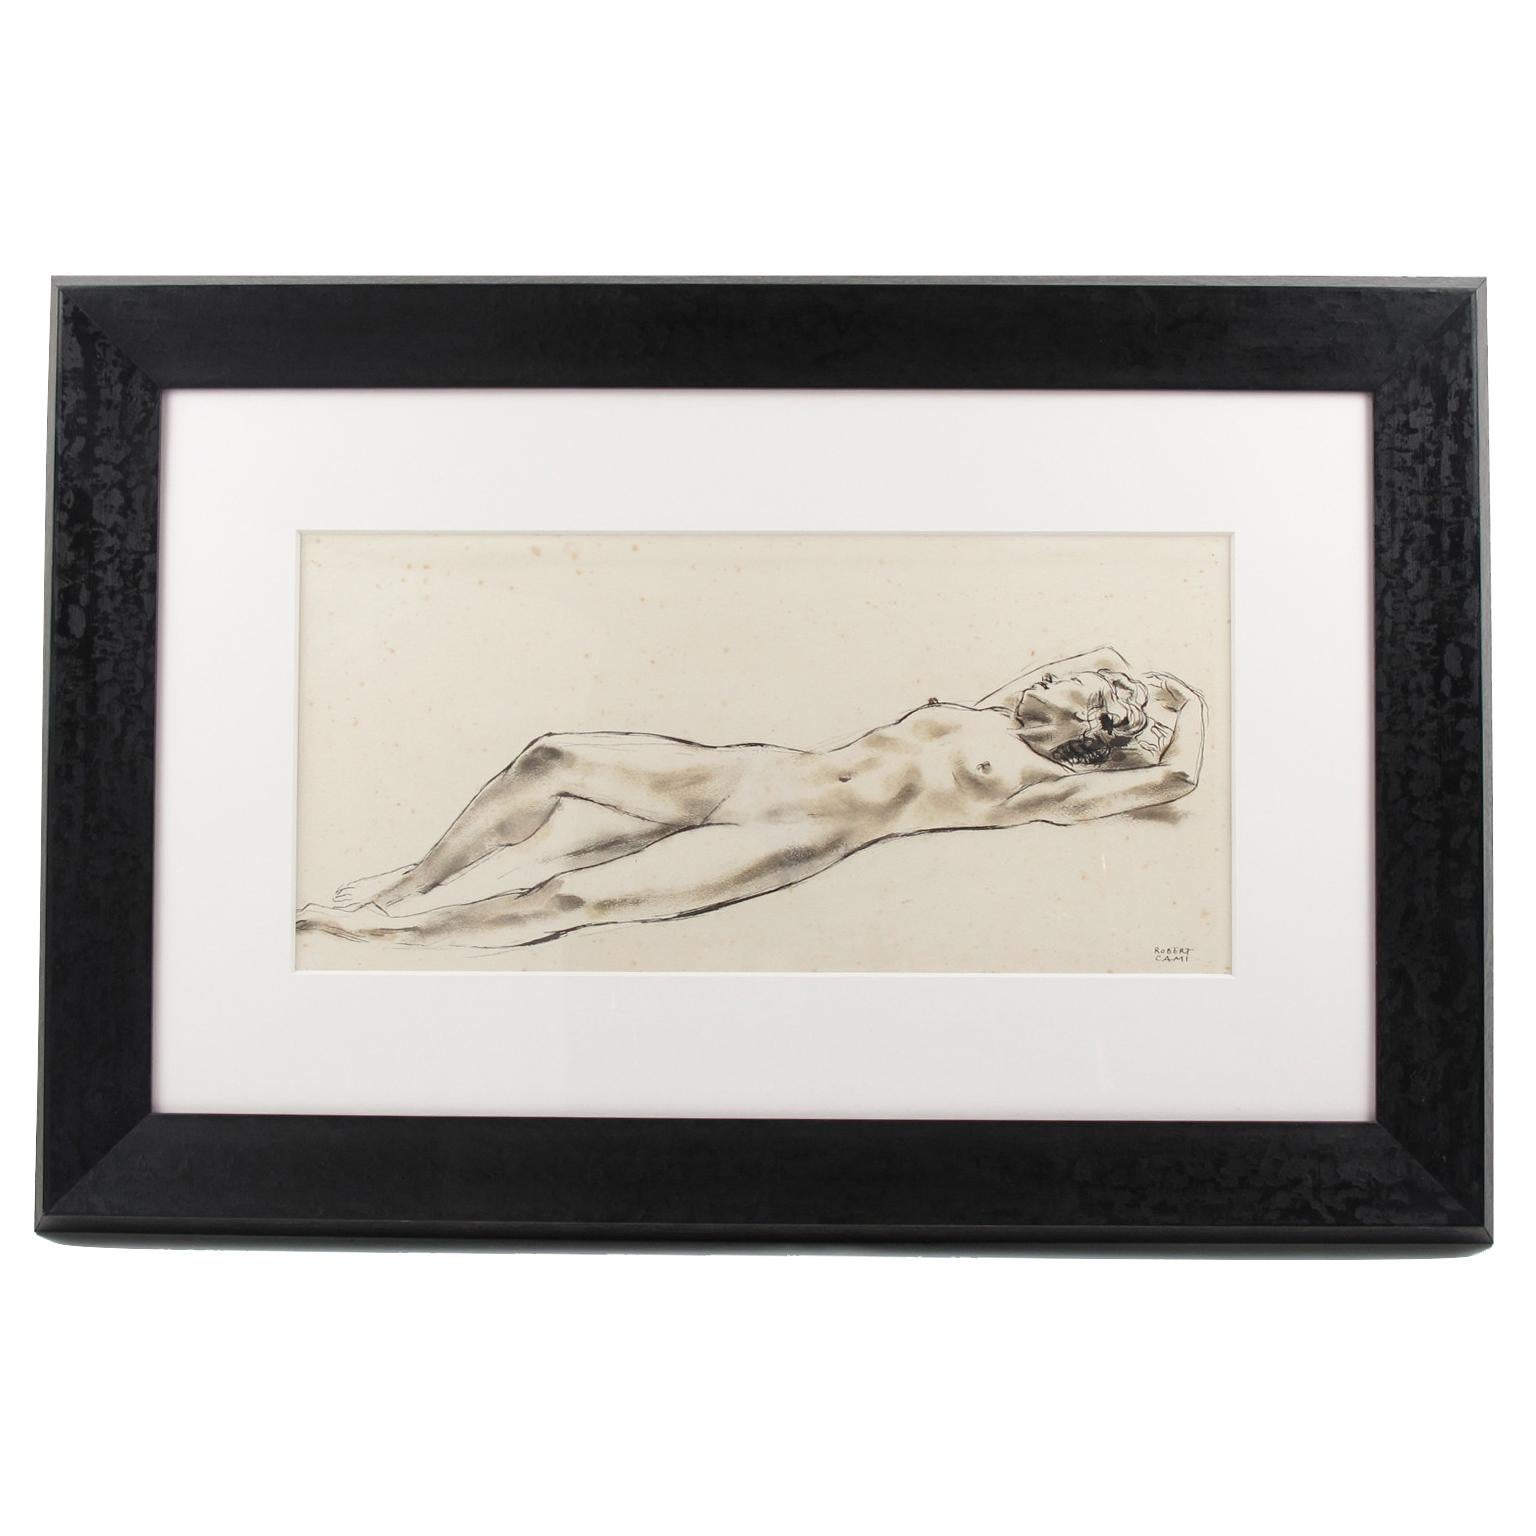 Nude Study Ink Wash Drawing Painting by Robert Cami For Sale 3